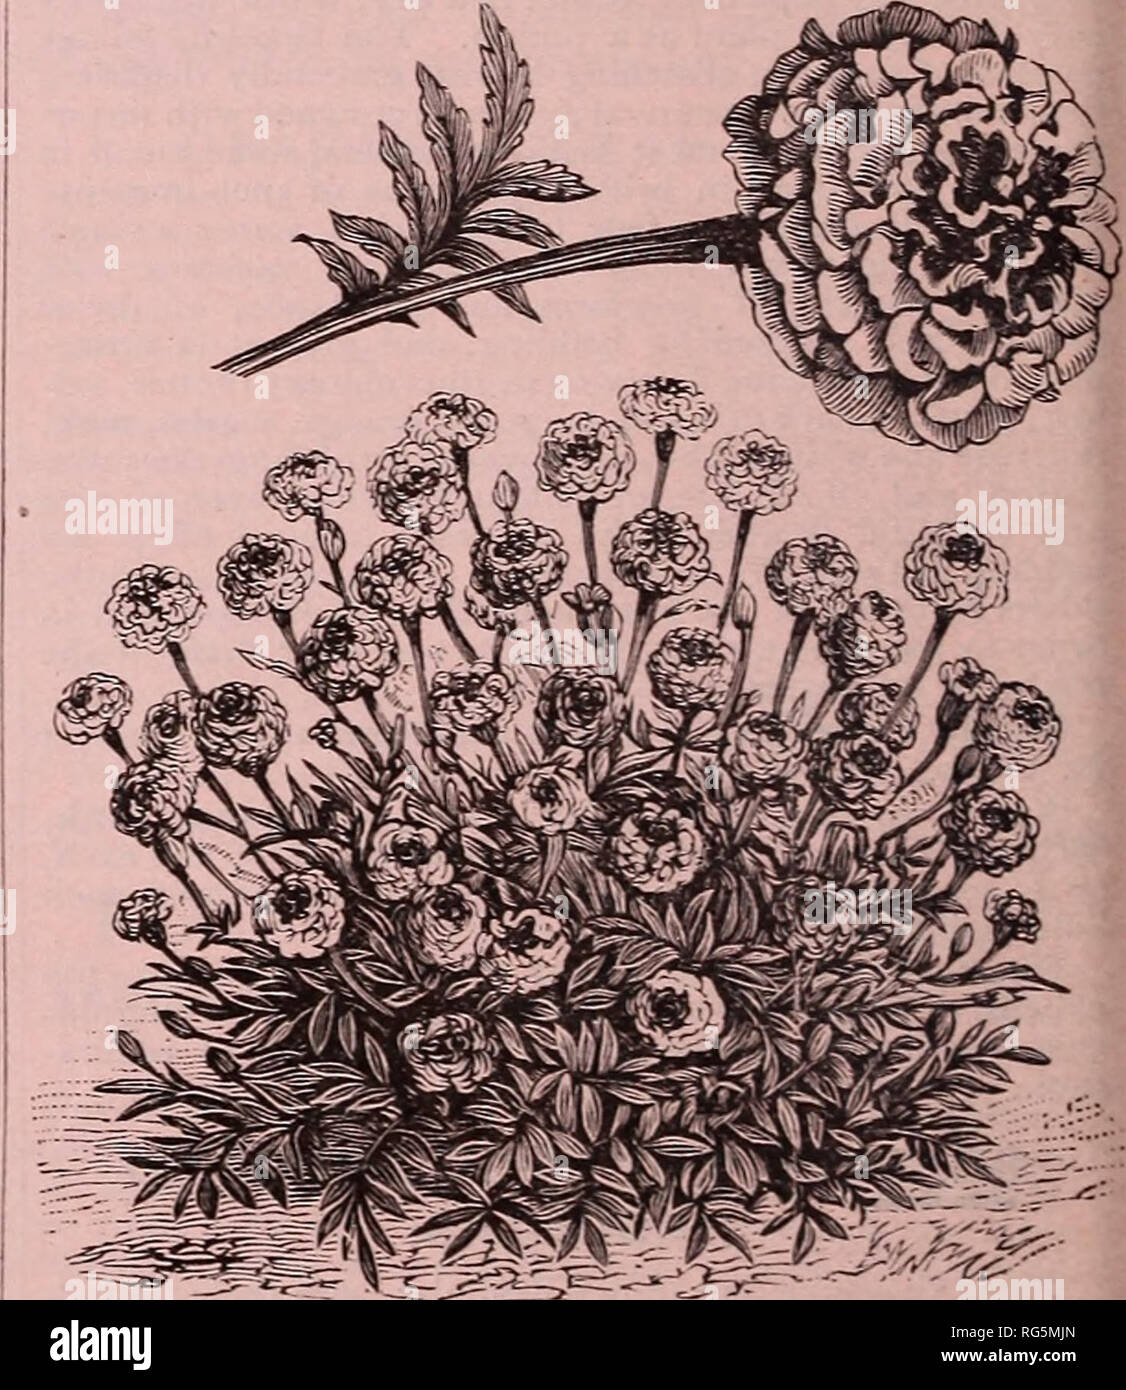 . Burpee's farm annual, 1887 : garden, farm, and flower seeds. Nursery stock Pennsylvania Philadelphia Catalogs; Flowers Catalogs; Vegetables Catalogs; Seeds Catalogs. BURPEE'S VESUVIUS POPPY. FRENCH DWARF PULCHRA MARIGOLD. NEW FRENCH MARIGOLD— DWARF DOUBLE PULCHRA. A charming variety, bearing a great profusion of small double flowers, groimd color of a rich golden yellow, but each petal has a distinct blotch of reddish-brown, giving a most pleasing effect to the flower. The plants are of cir- cular form, and only twelve inches in height, while the foliage is unusually dark green in color, fro Stock Photo